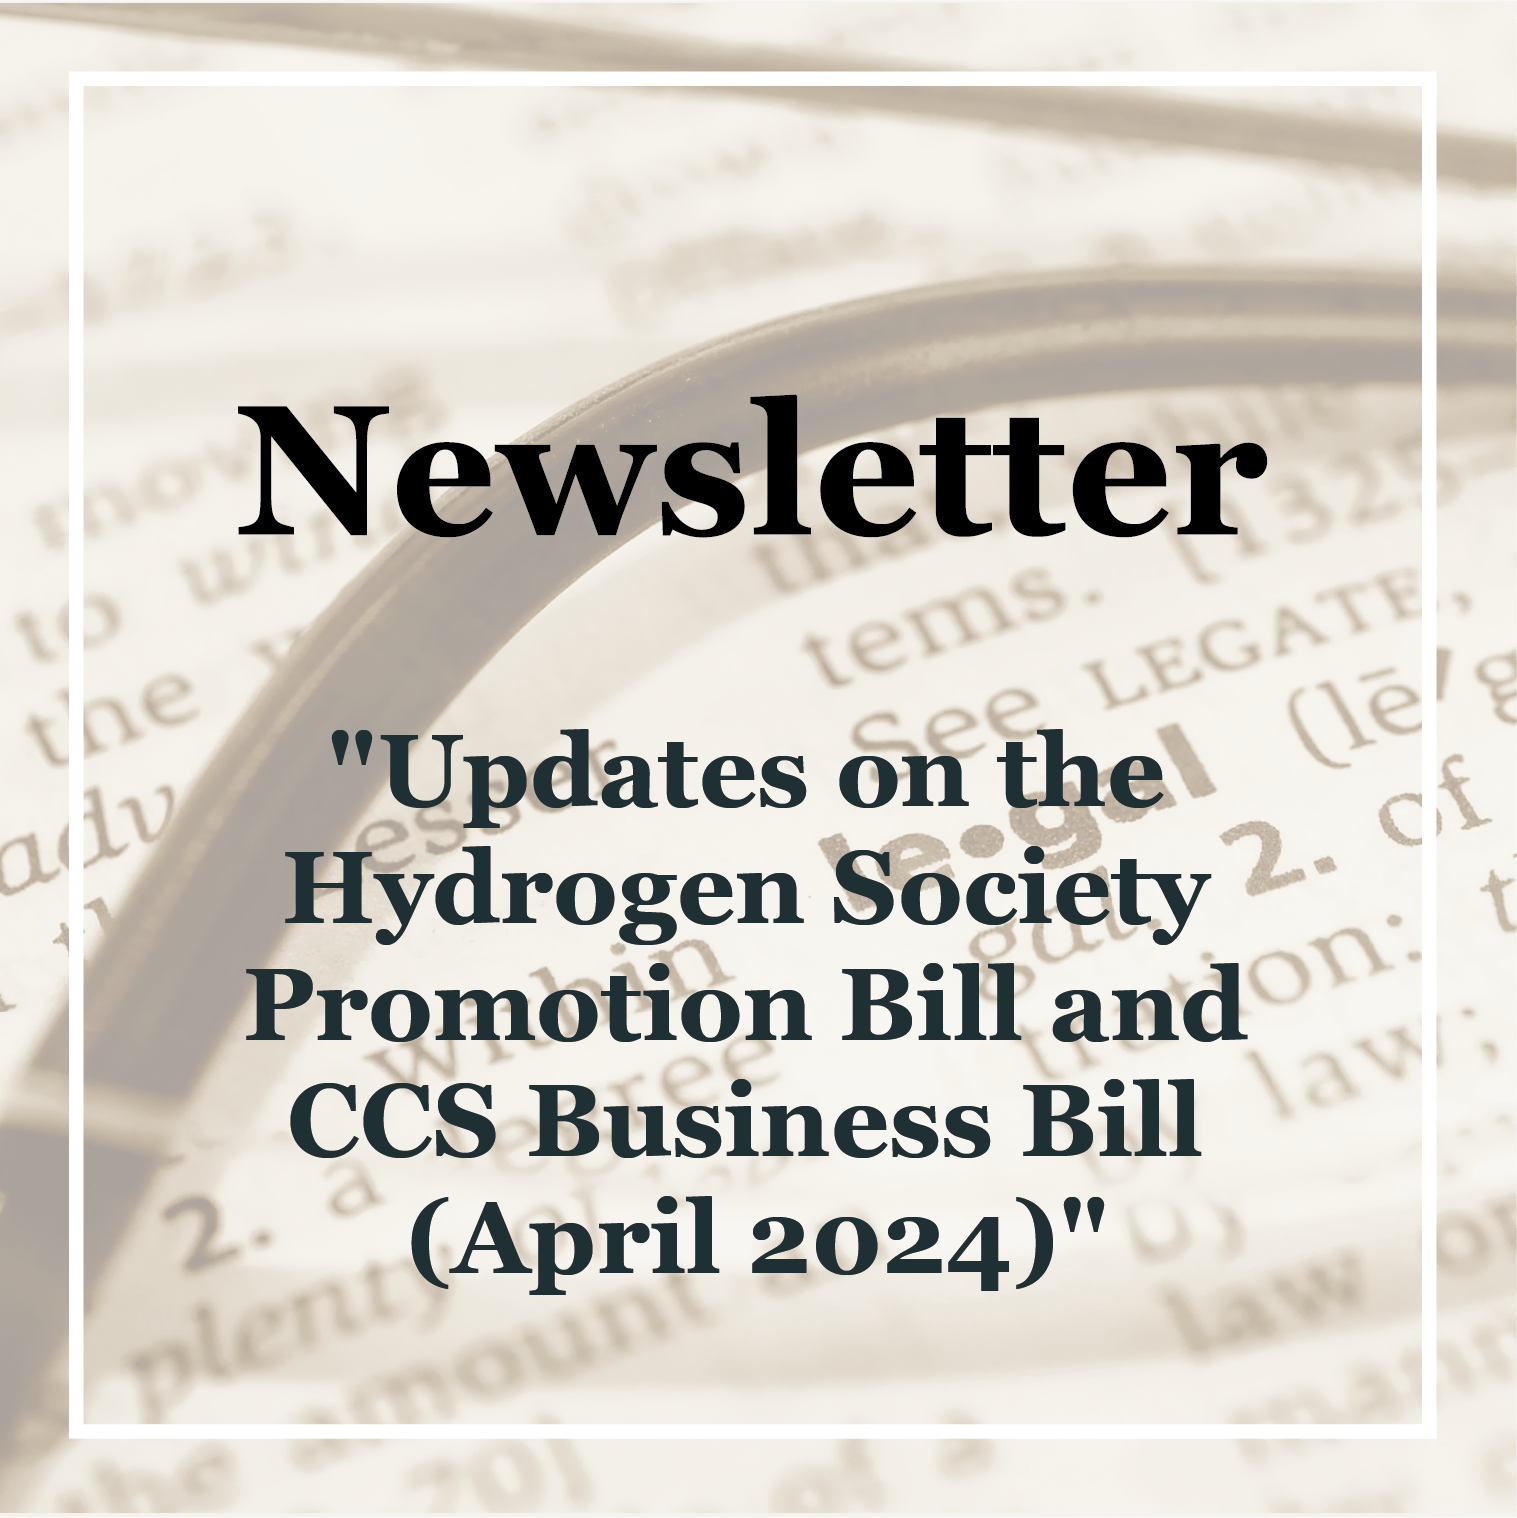 "Updates on the Hydrogen Society Promotion Bill and CCS Business Bill (April 2024)": Projects & Energy Practice Team